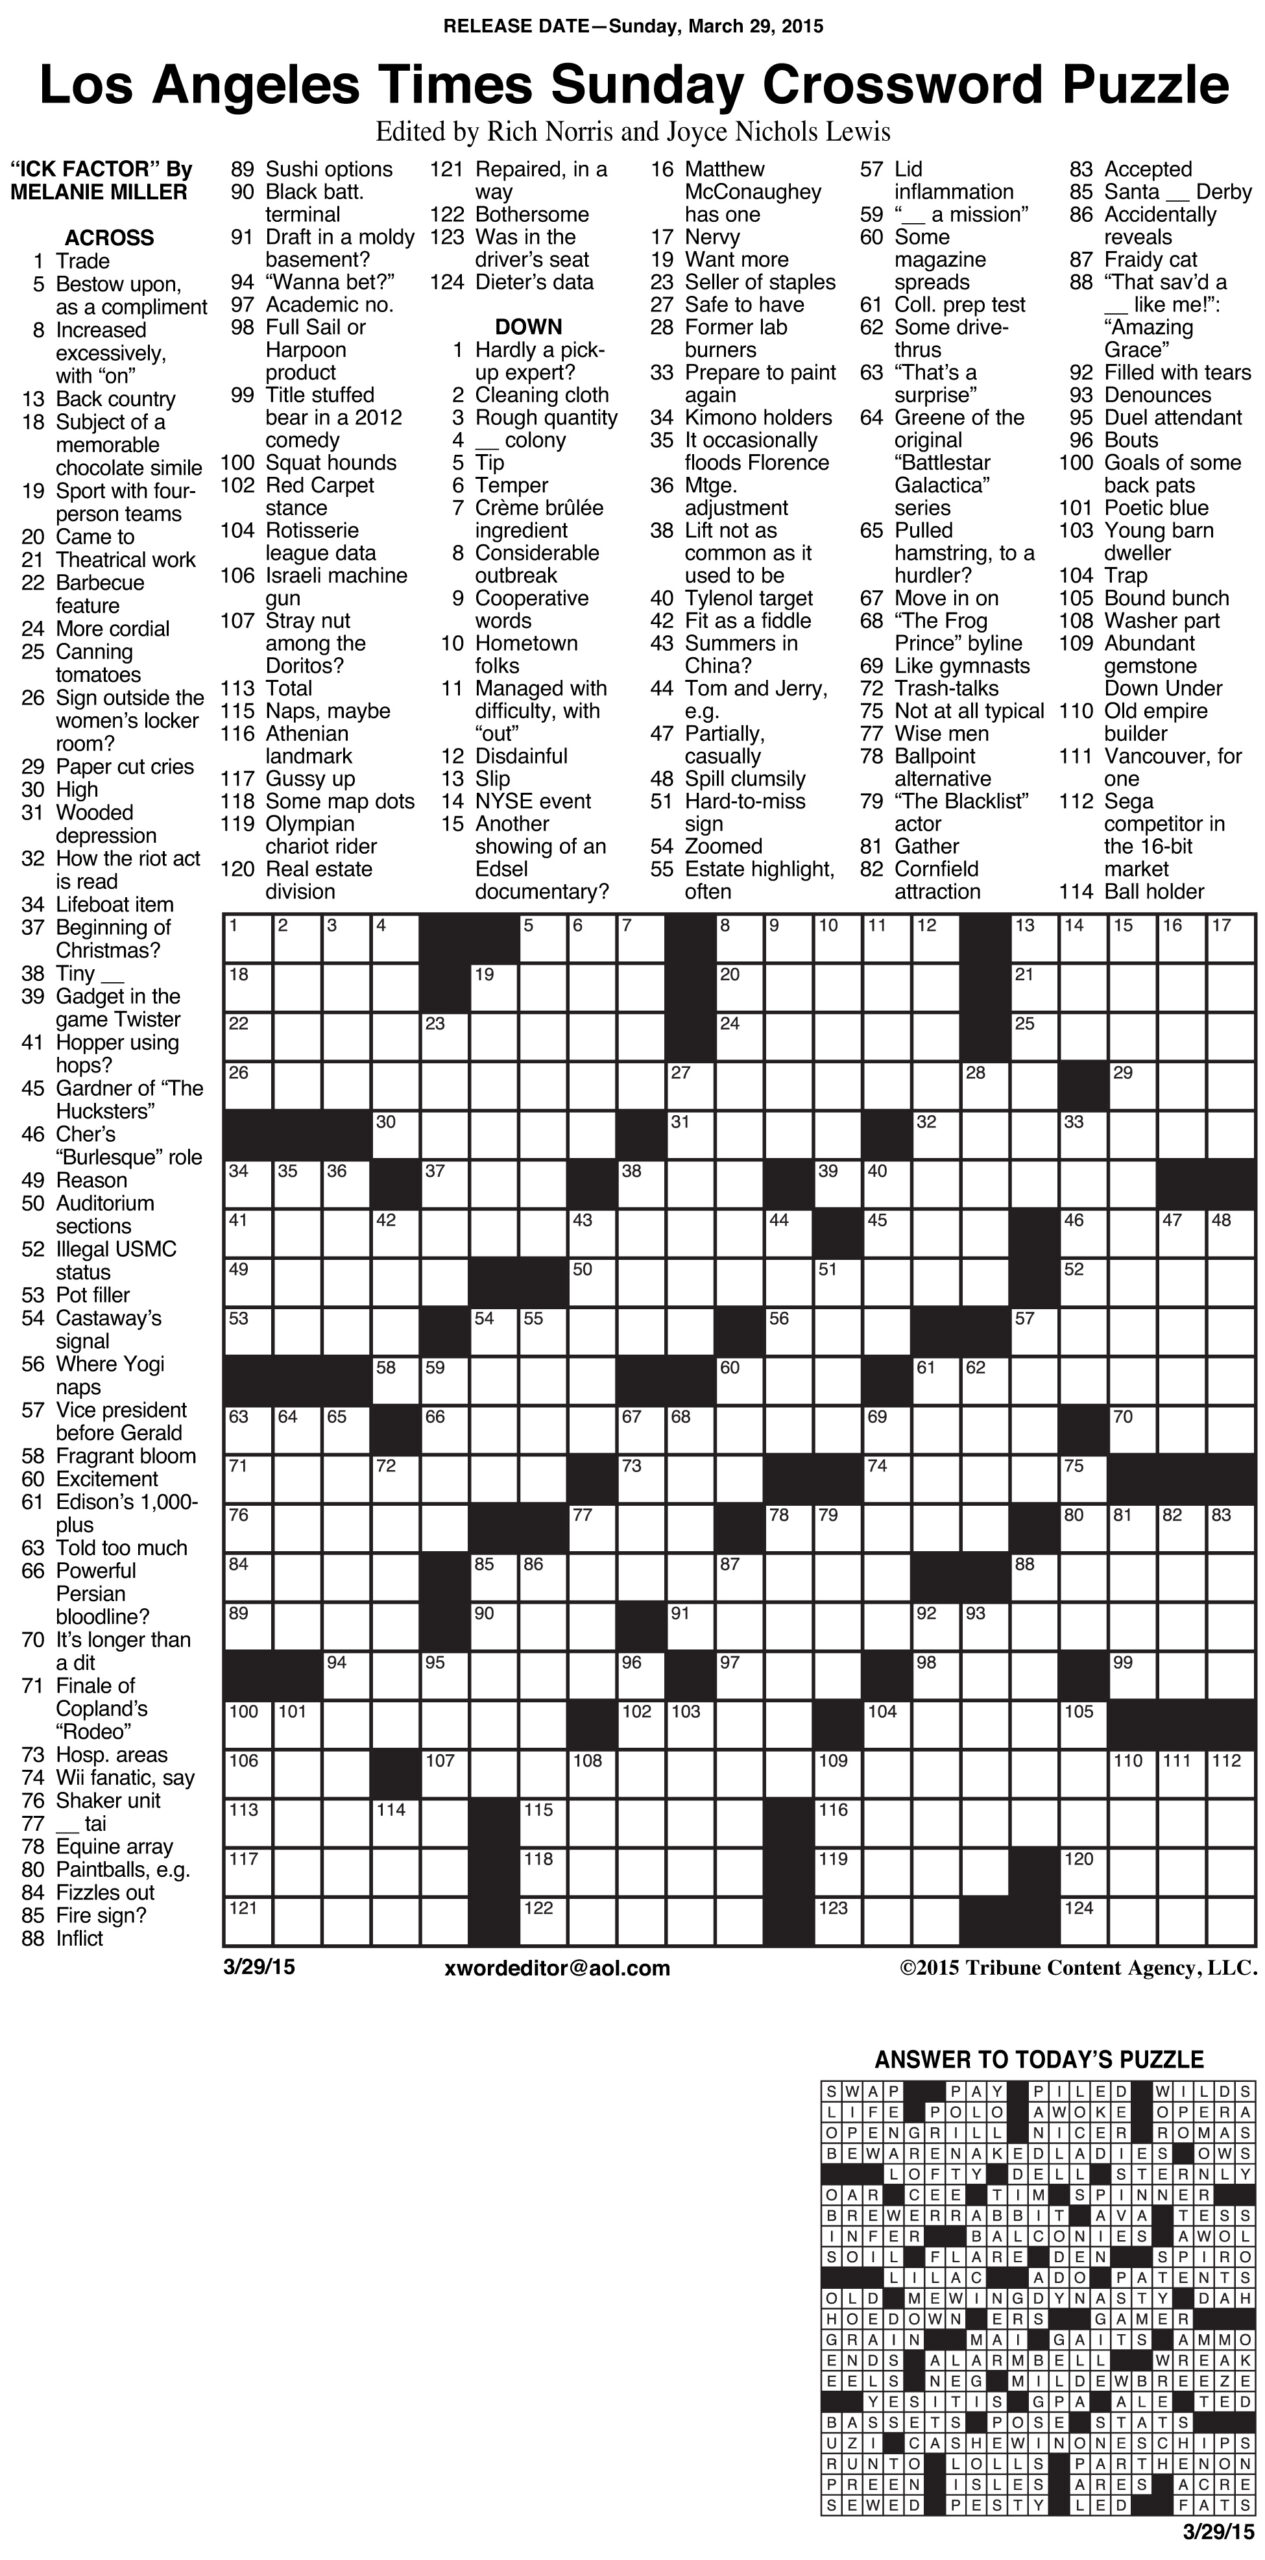 The New York Times Crossword In Gothic April 2013 La Times Printable 